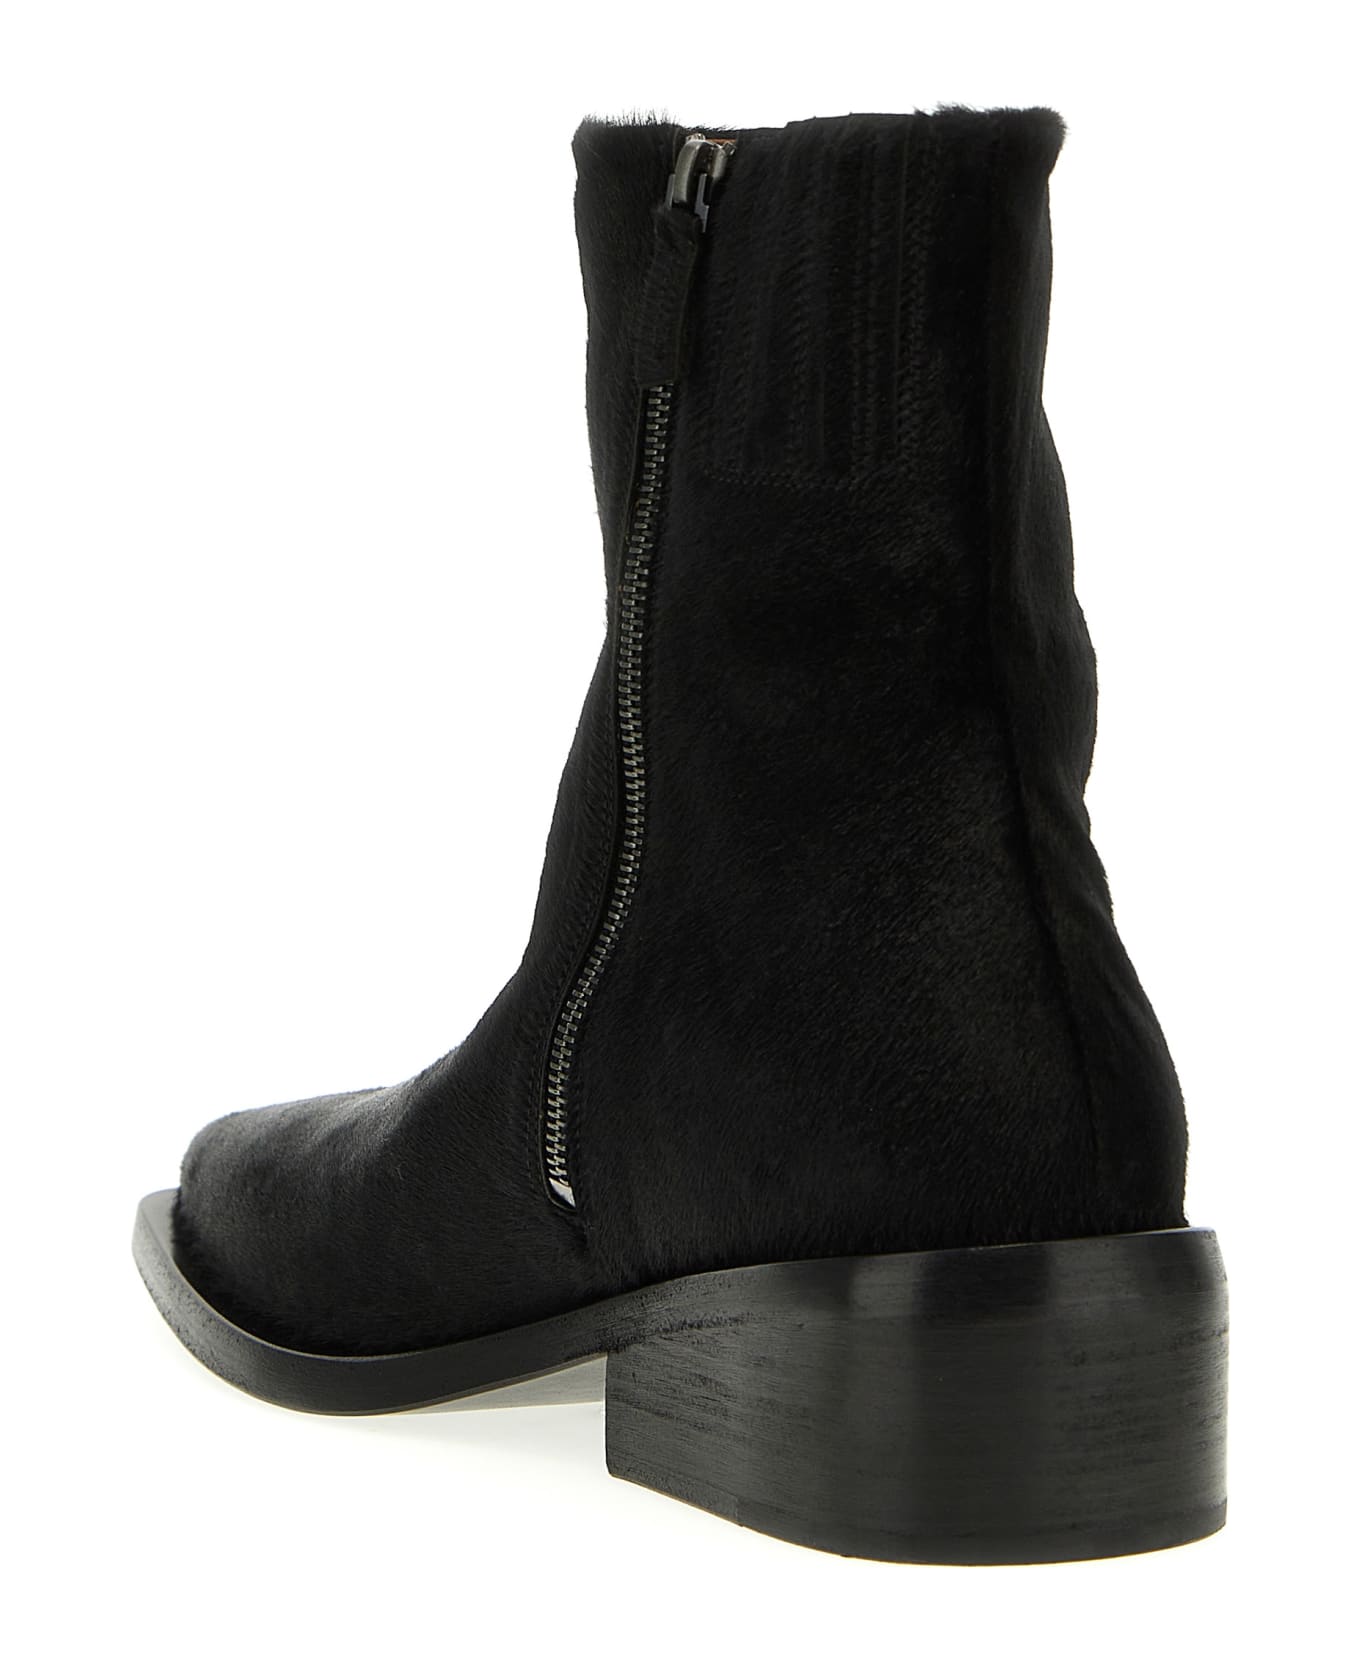 Marsell 'gessetto' Ankle Boots - Black  